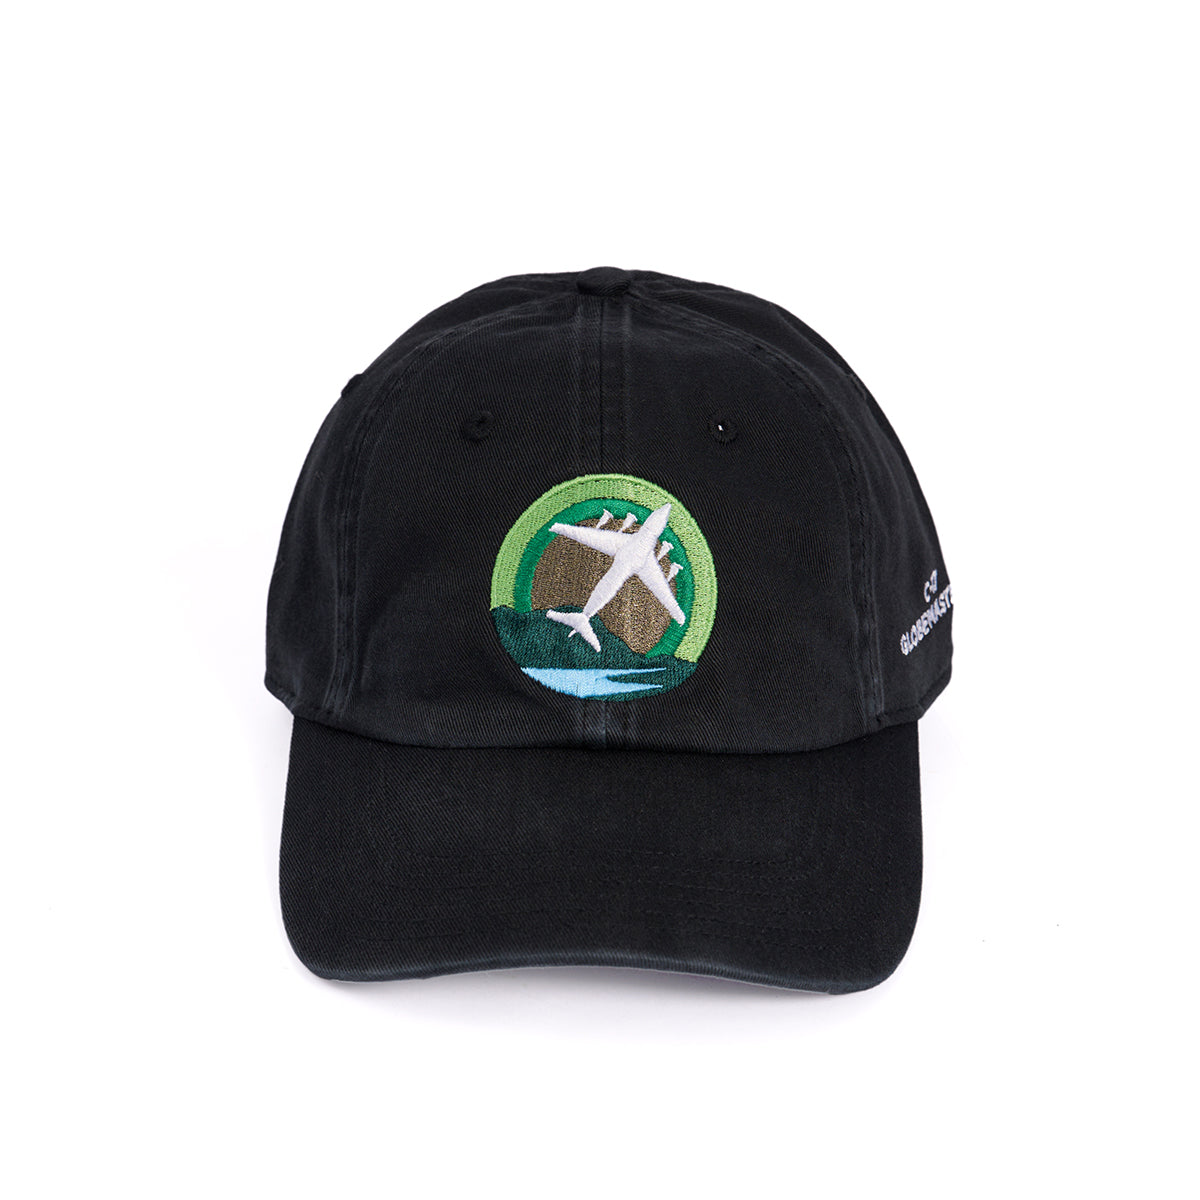 Skyward hat, featuring the iconic Boeing C-17 Globemaster embroidered in a roundel design on the front.